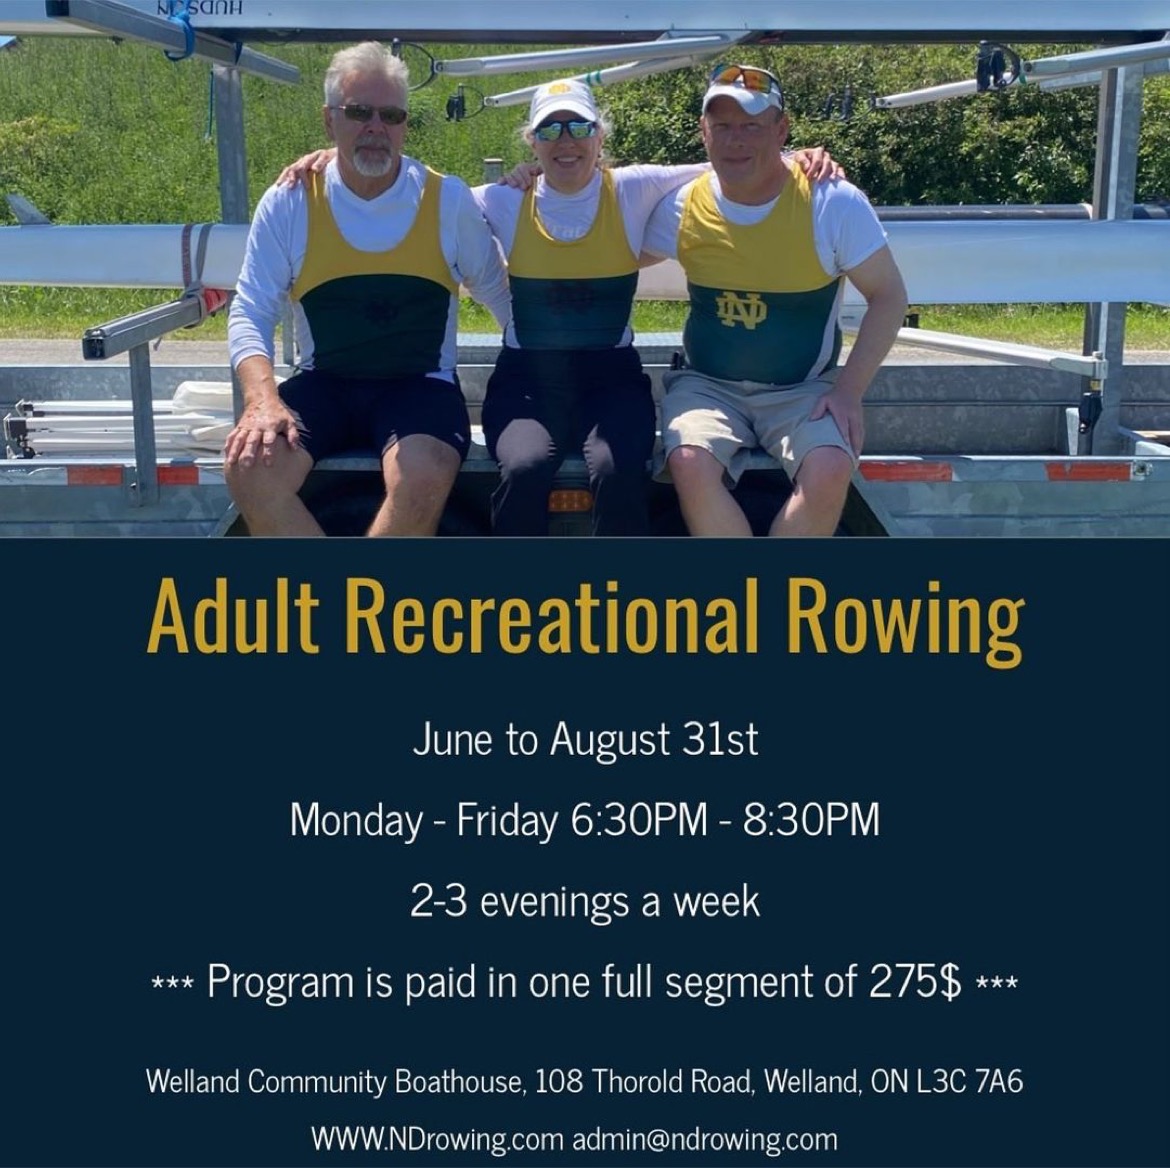 Adult Recreational Rowing